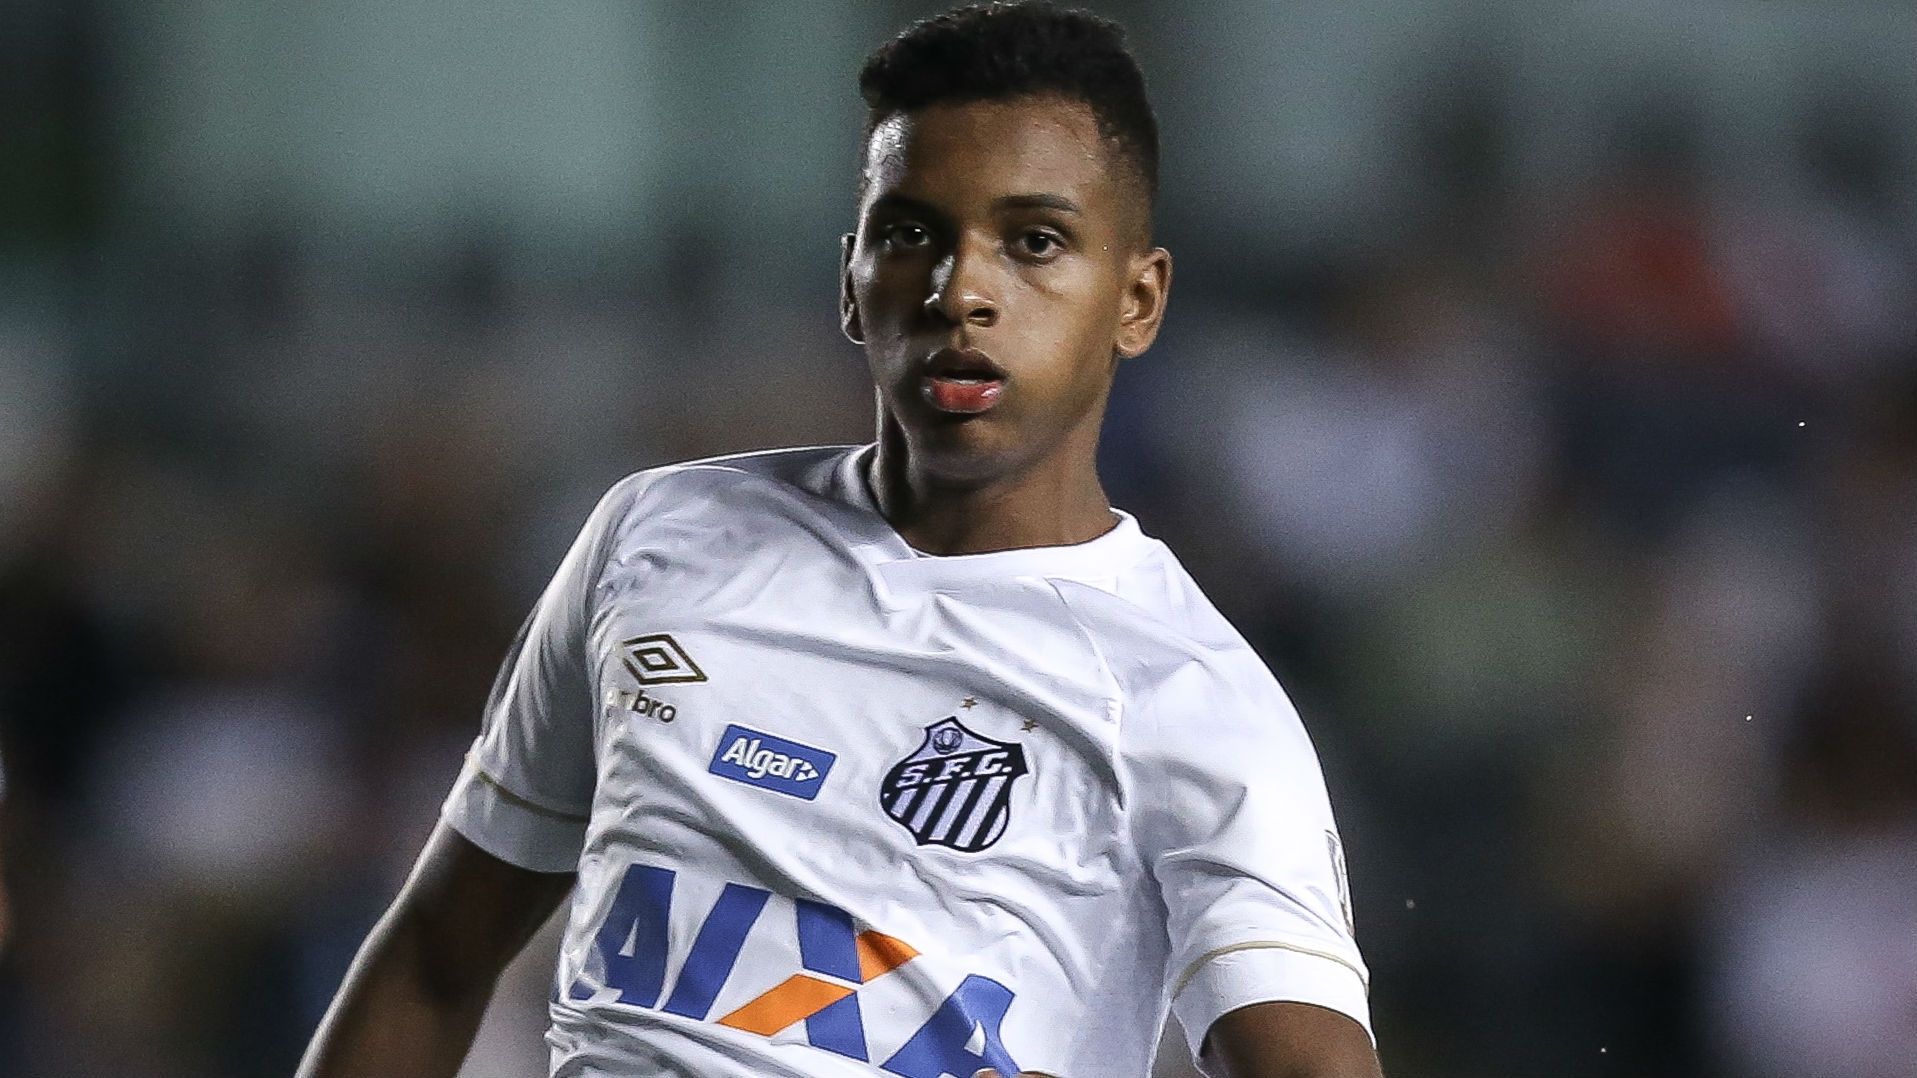  Rodrygo Silva de Goes, known as Rodrygo, is a Brazilian professional footballer who plays as a winger for Spanish club Real Madrid and the Brazil national team.